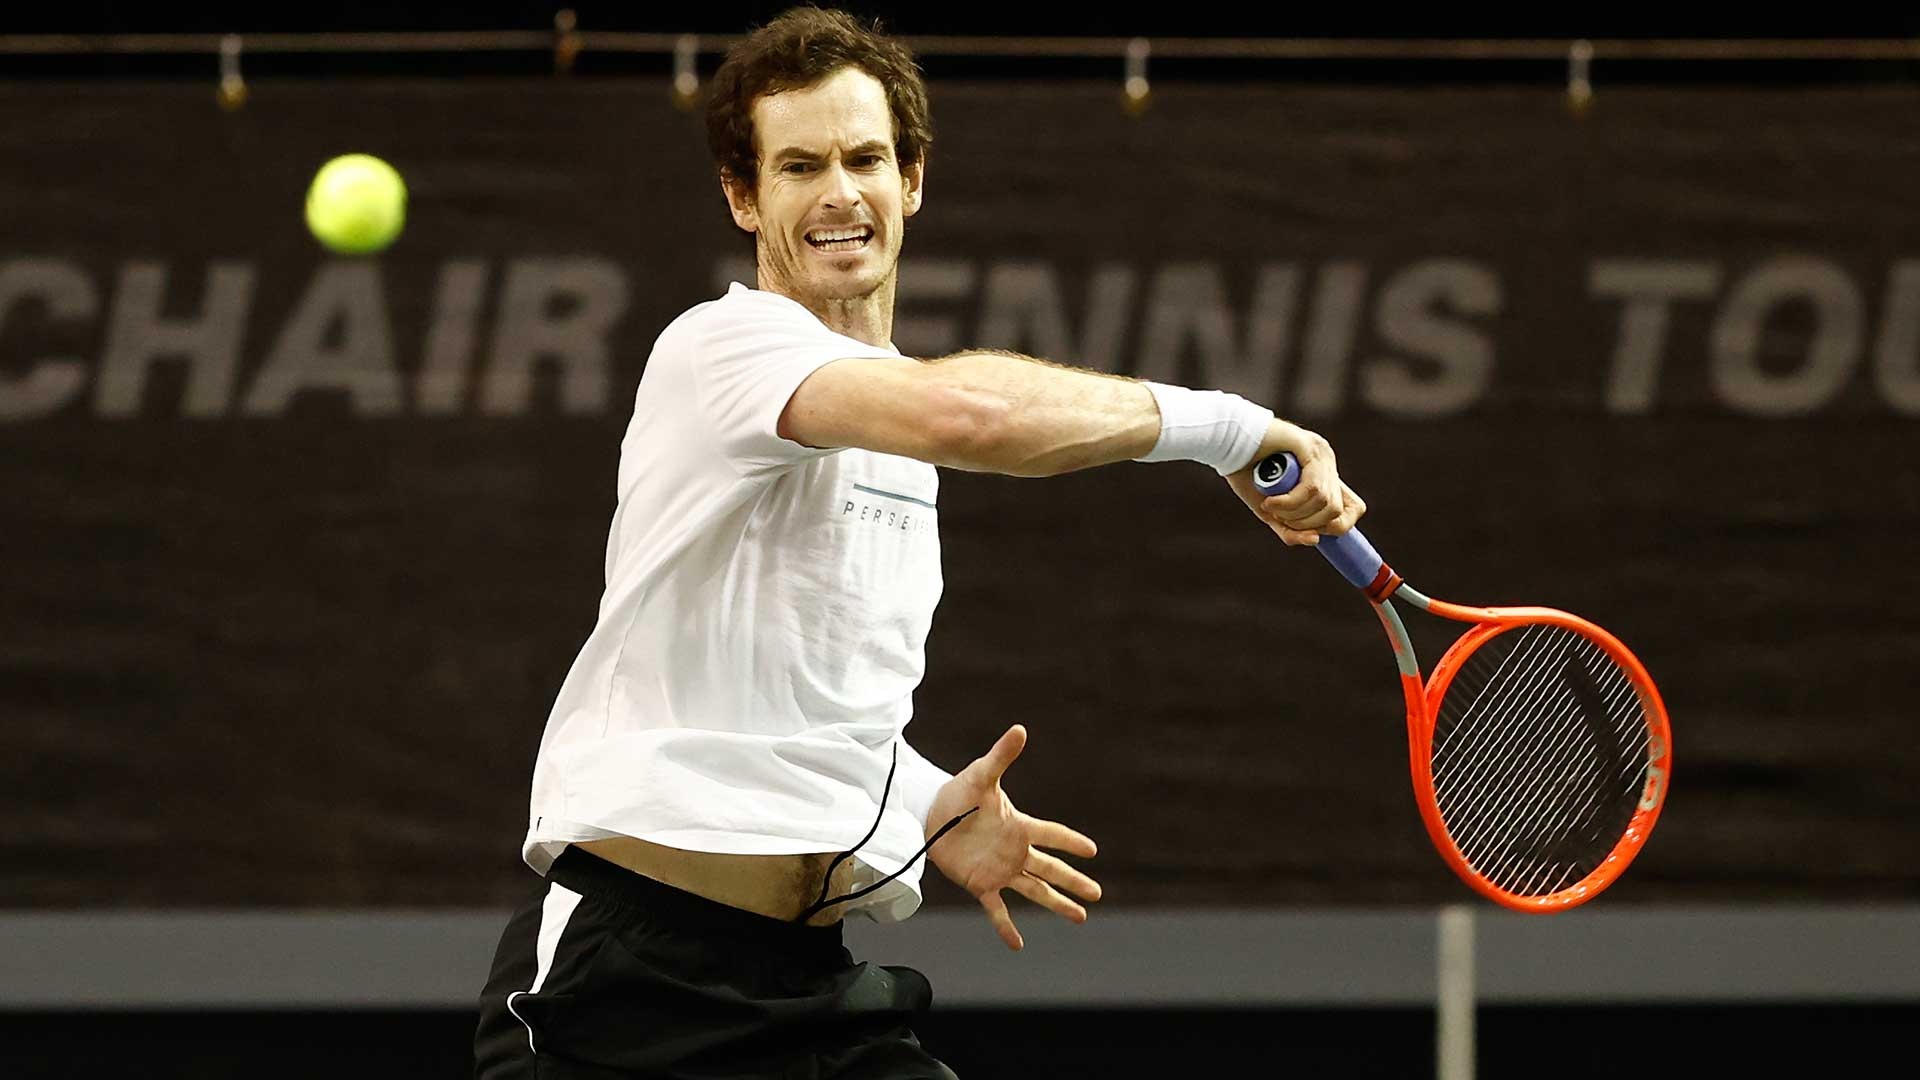 Andy Murray, Eager to compete, Rotterdam ATP Tour, Tennis excitement, 1920x1080 Full HD Desktop